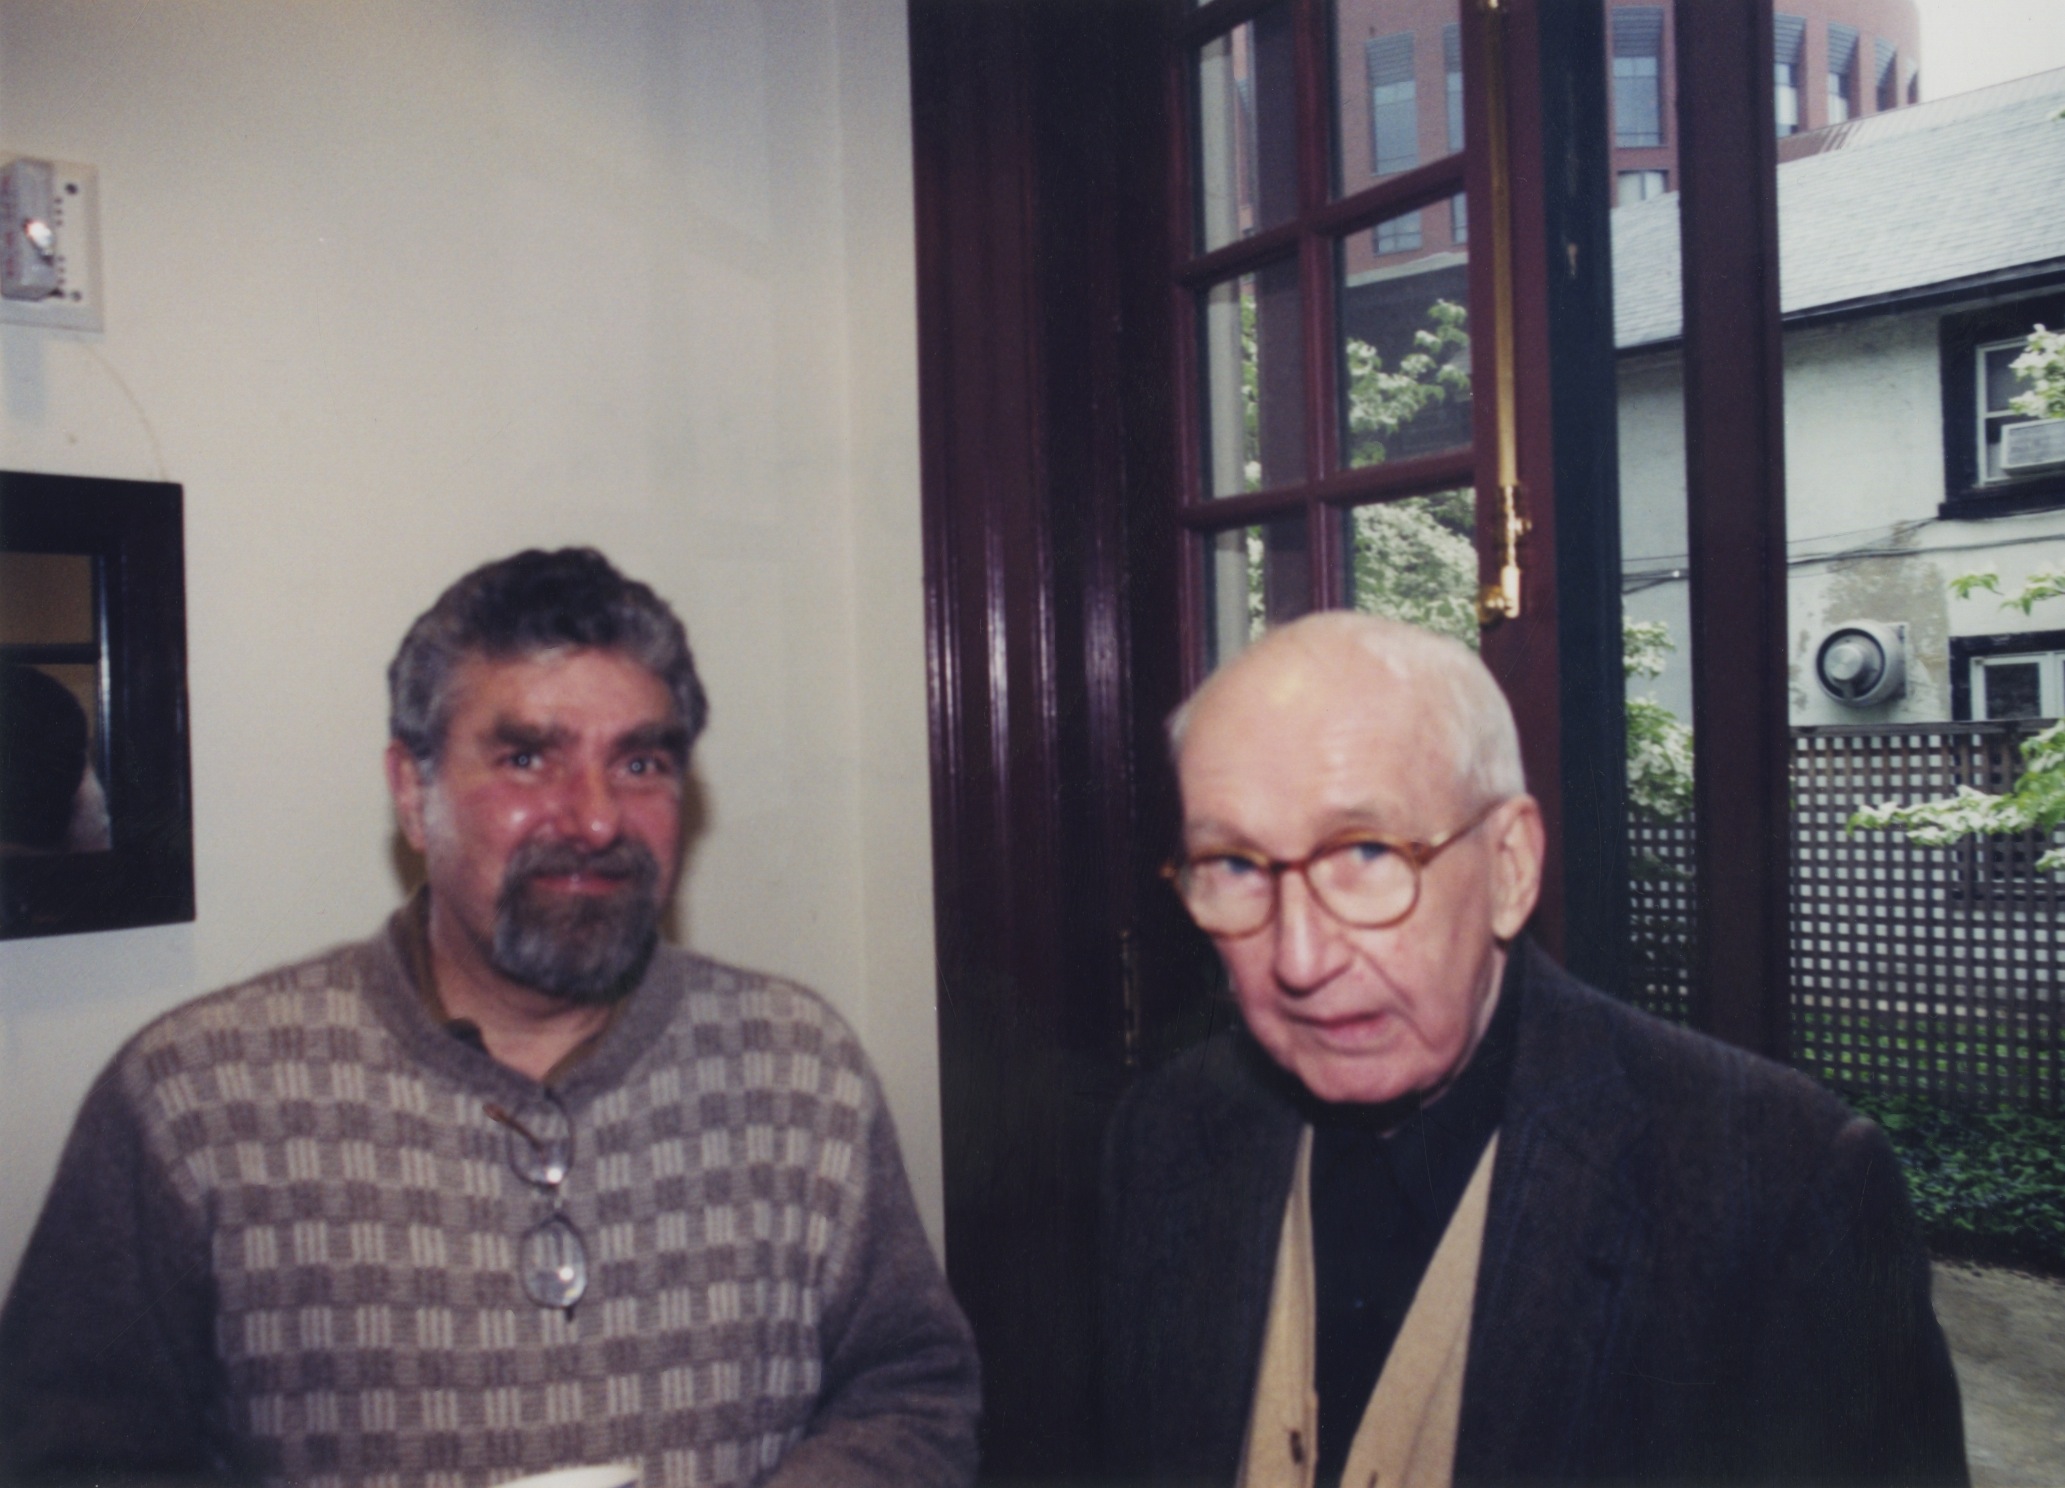 there are two men, one in glasses and one looking into the camera